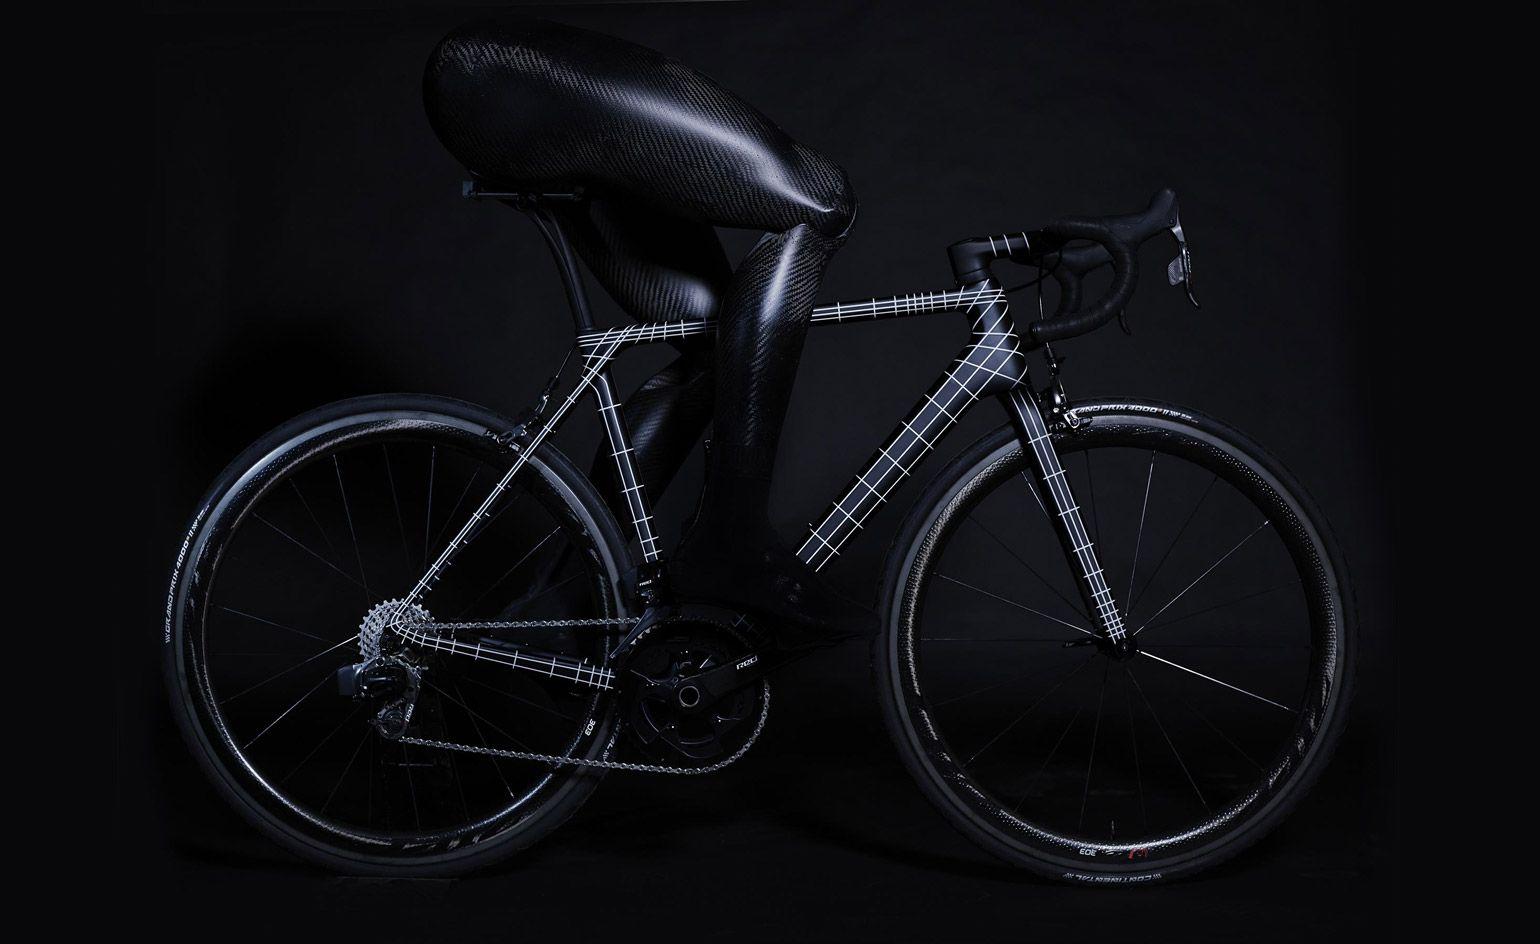 Canyon's Kraftwerk Designed Bicycle Is A Futuristic Marvel. Wallpaper*